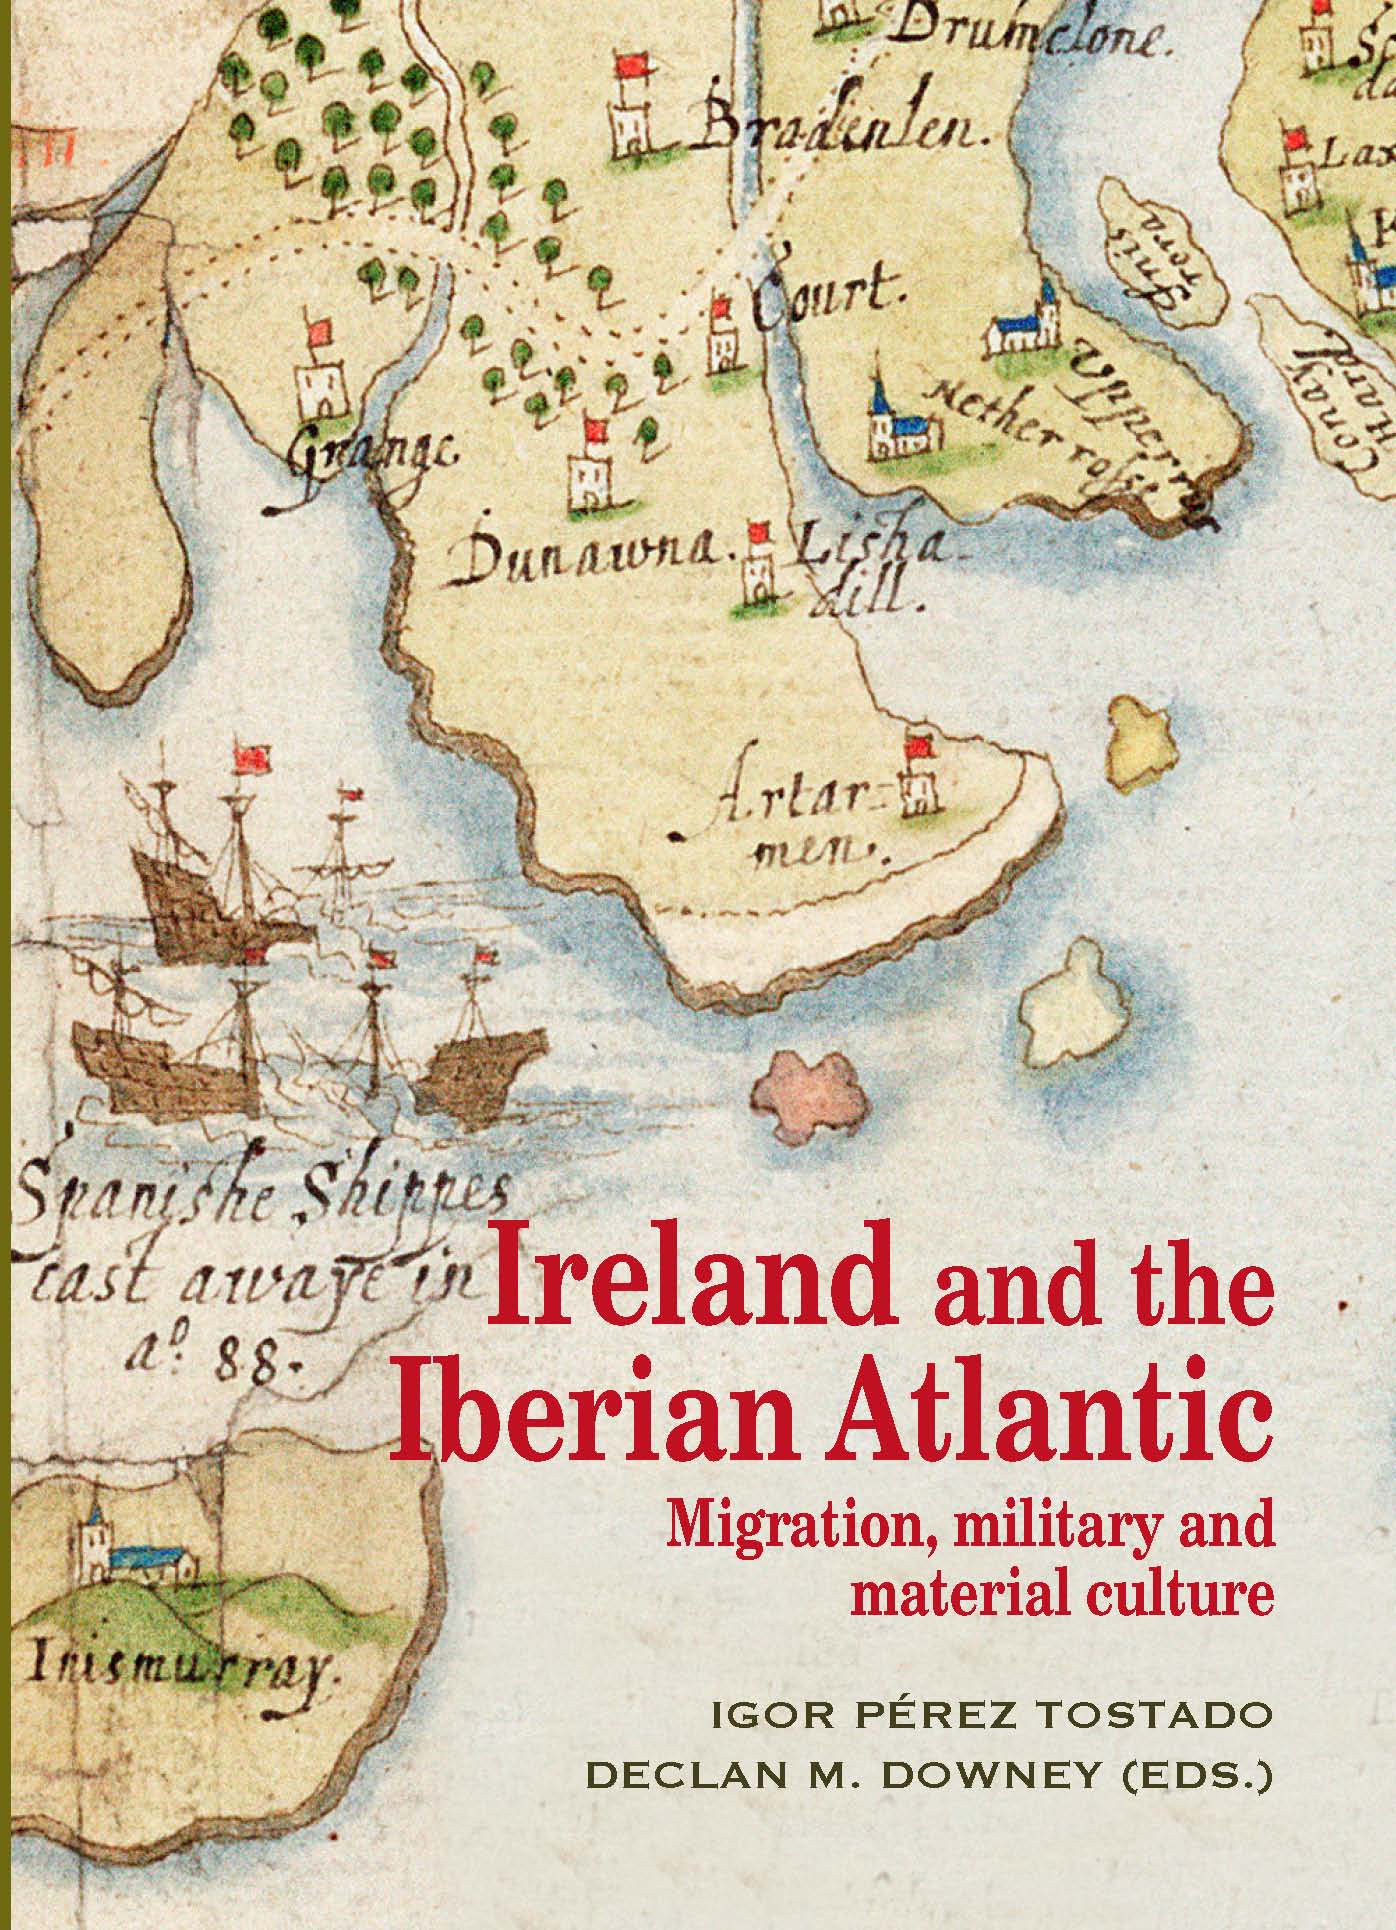 Ireland and the Iberian Atlantic. MIgration, military and material culture